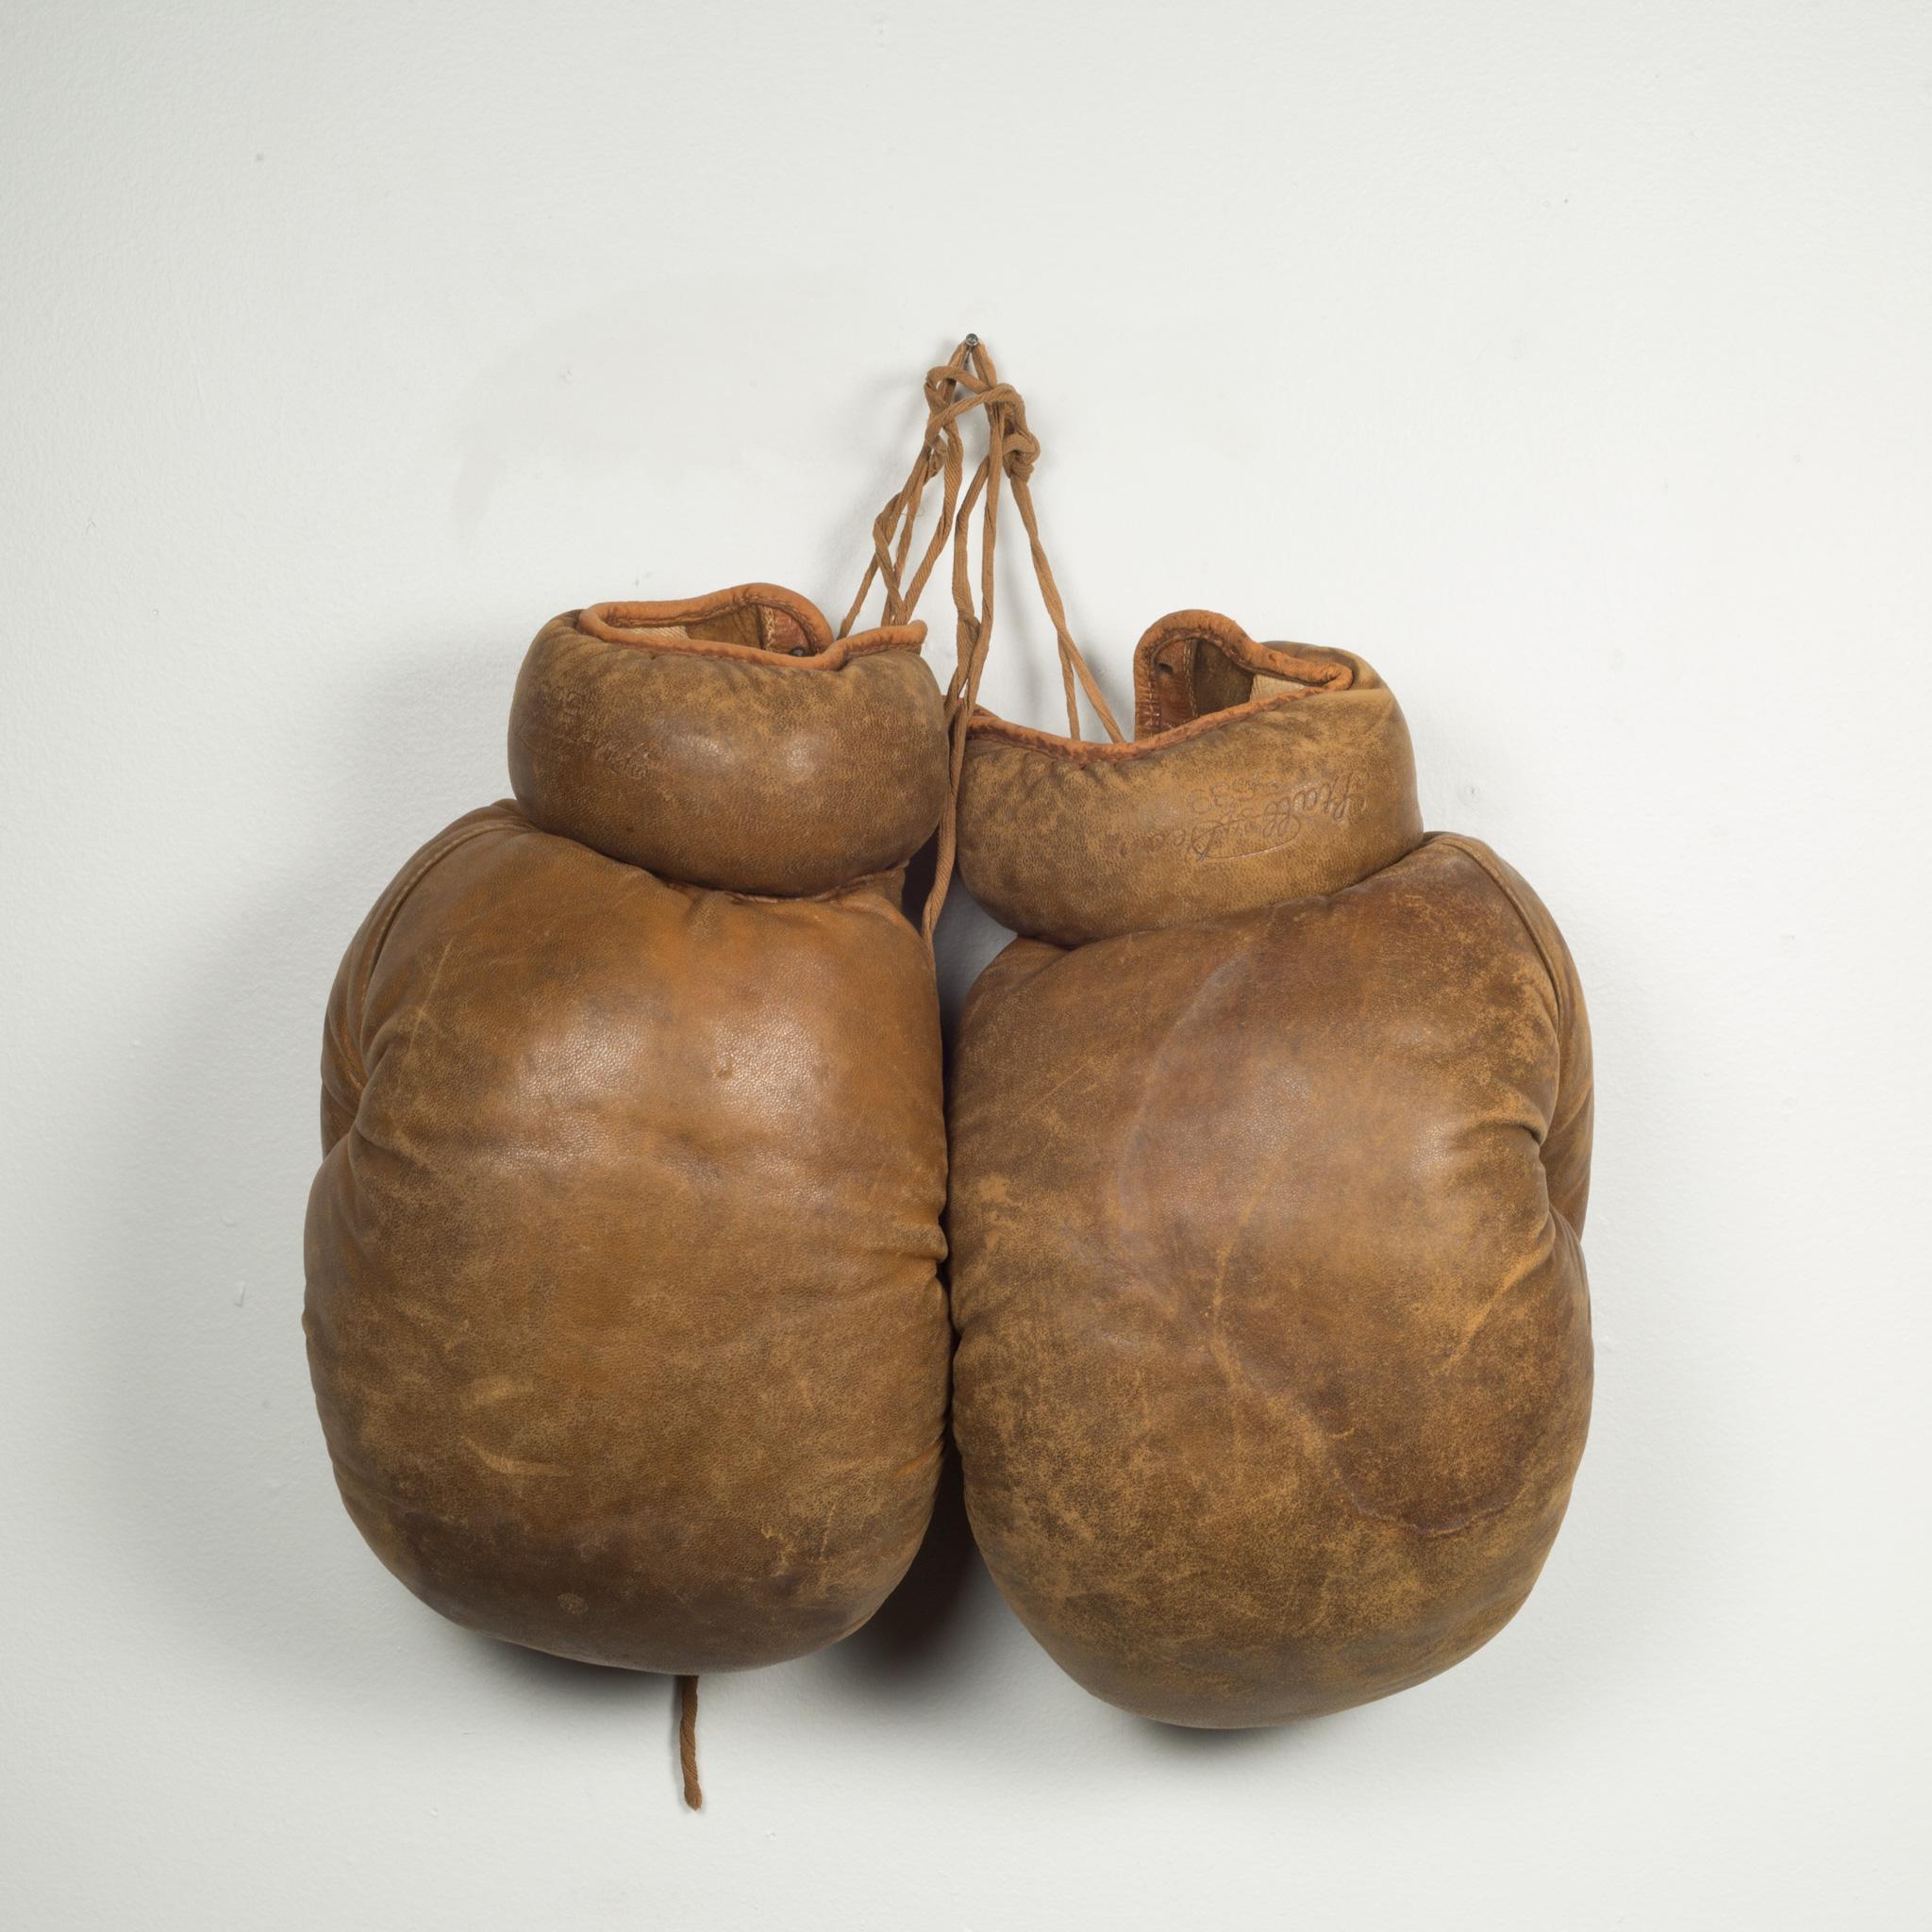 About

Original boxing gloves with brown leather filled with horse hair. The leather is very soft and in good condition. Stamped 